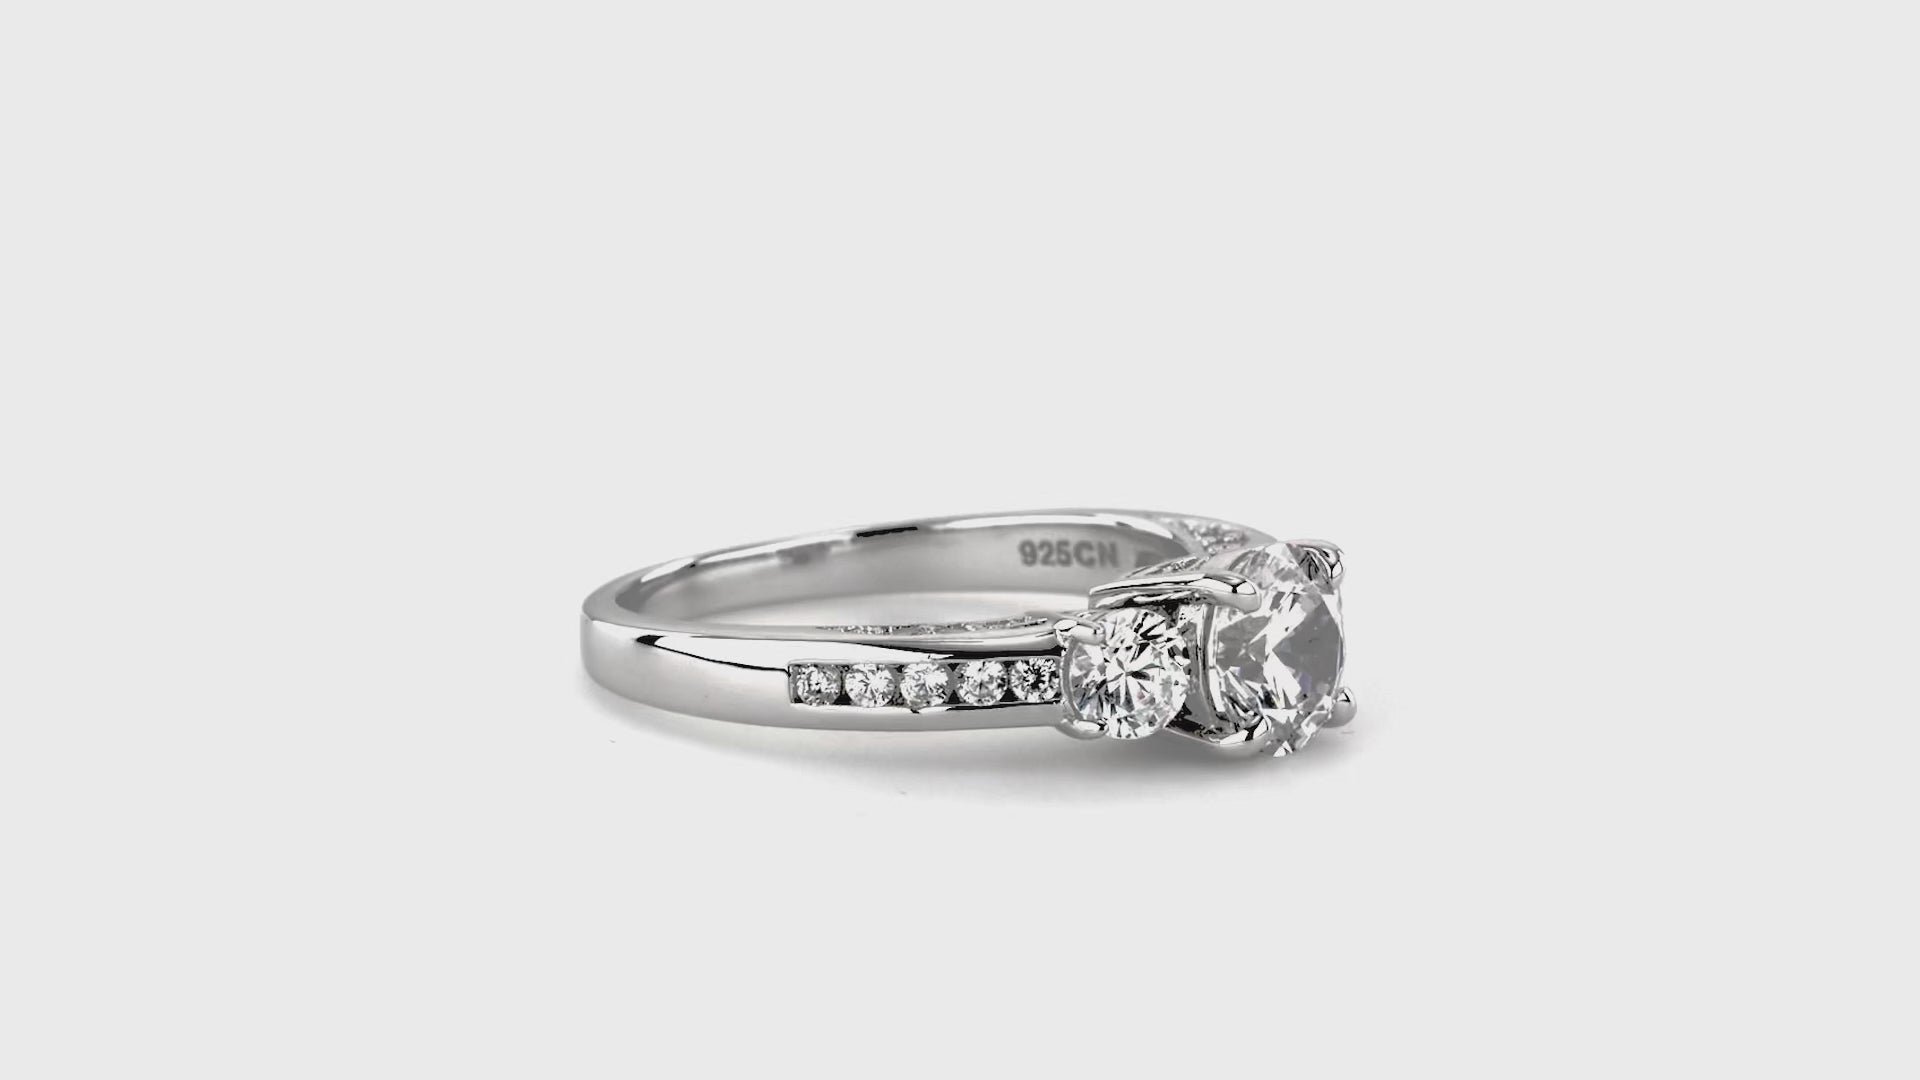 Video Contains 3-Stone Round CZ Ring Set in Sterling Silver. Style Number VR453-02